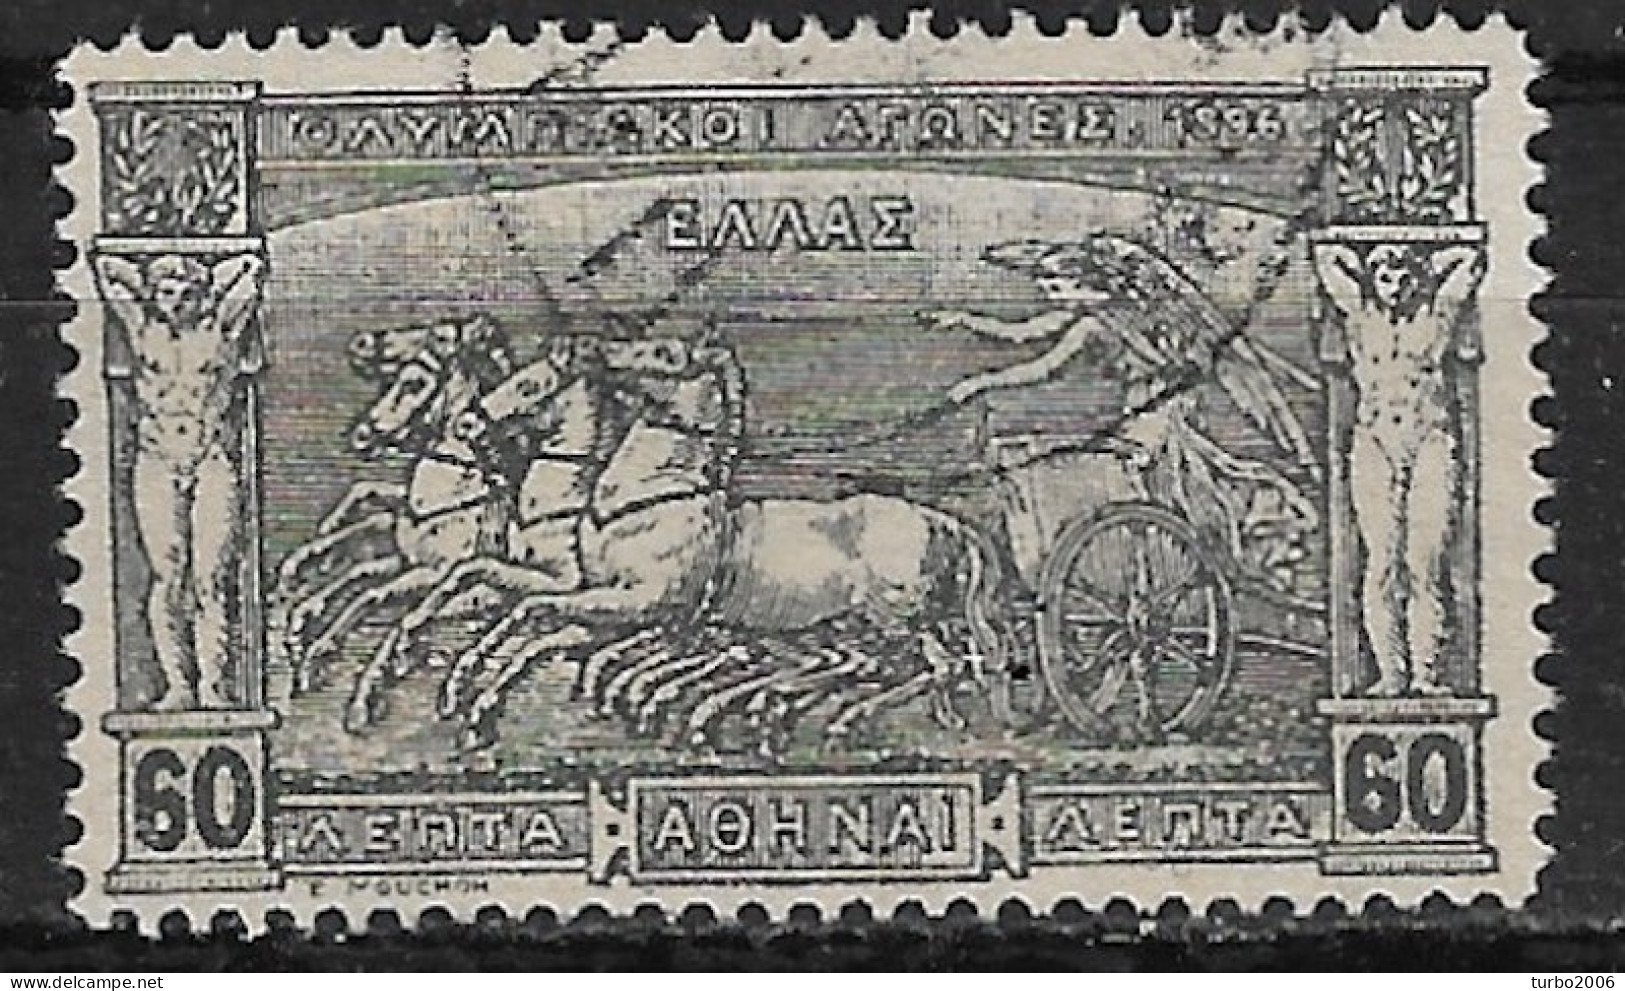 GREECE 1896 First Olympic Games 60 Lepta Black Vl. 140 Interesting Classic Forgery With Fake Cancellation ΠΑΤΡΑΙ - Gebruikt